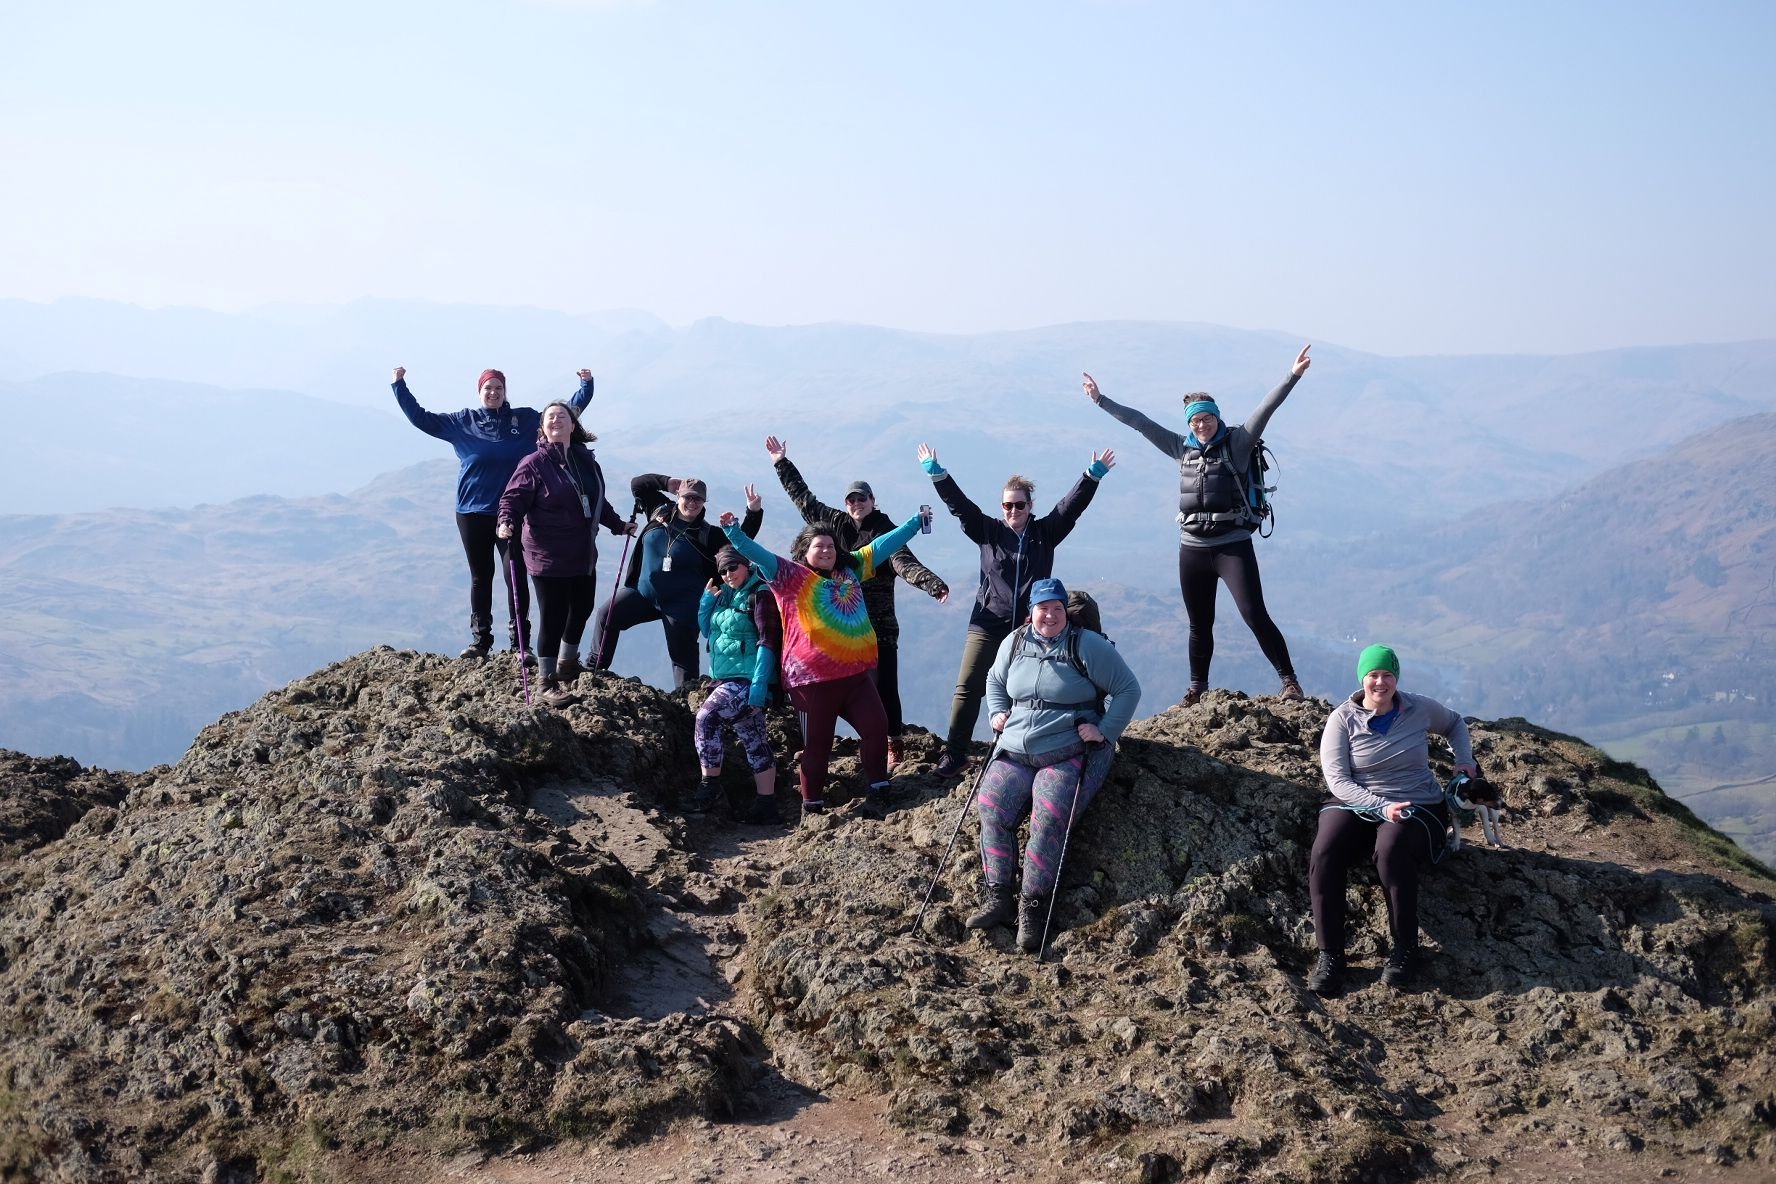 For Muslim hikers, an empowering community makes all the difference